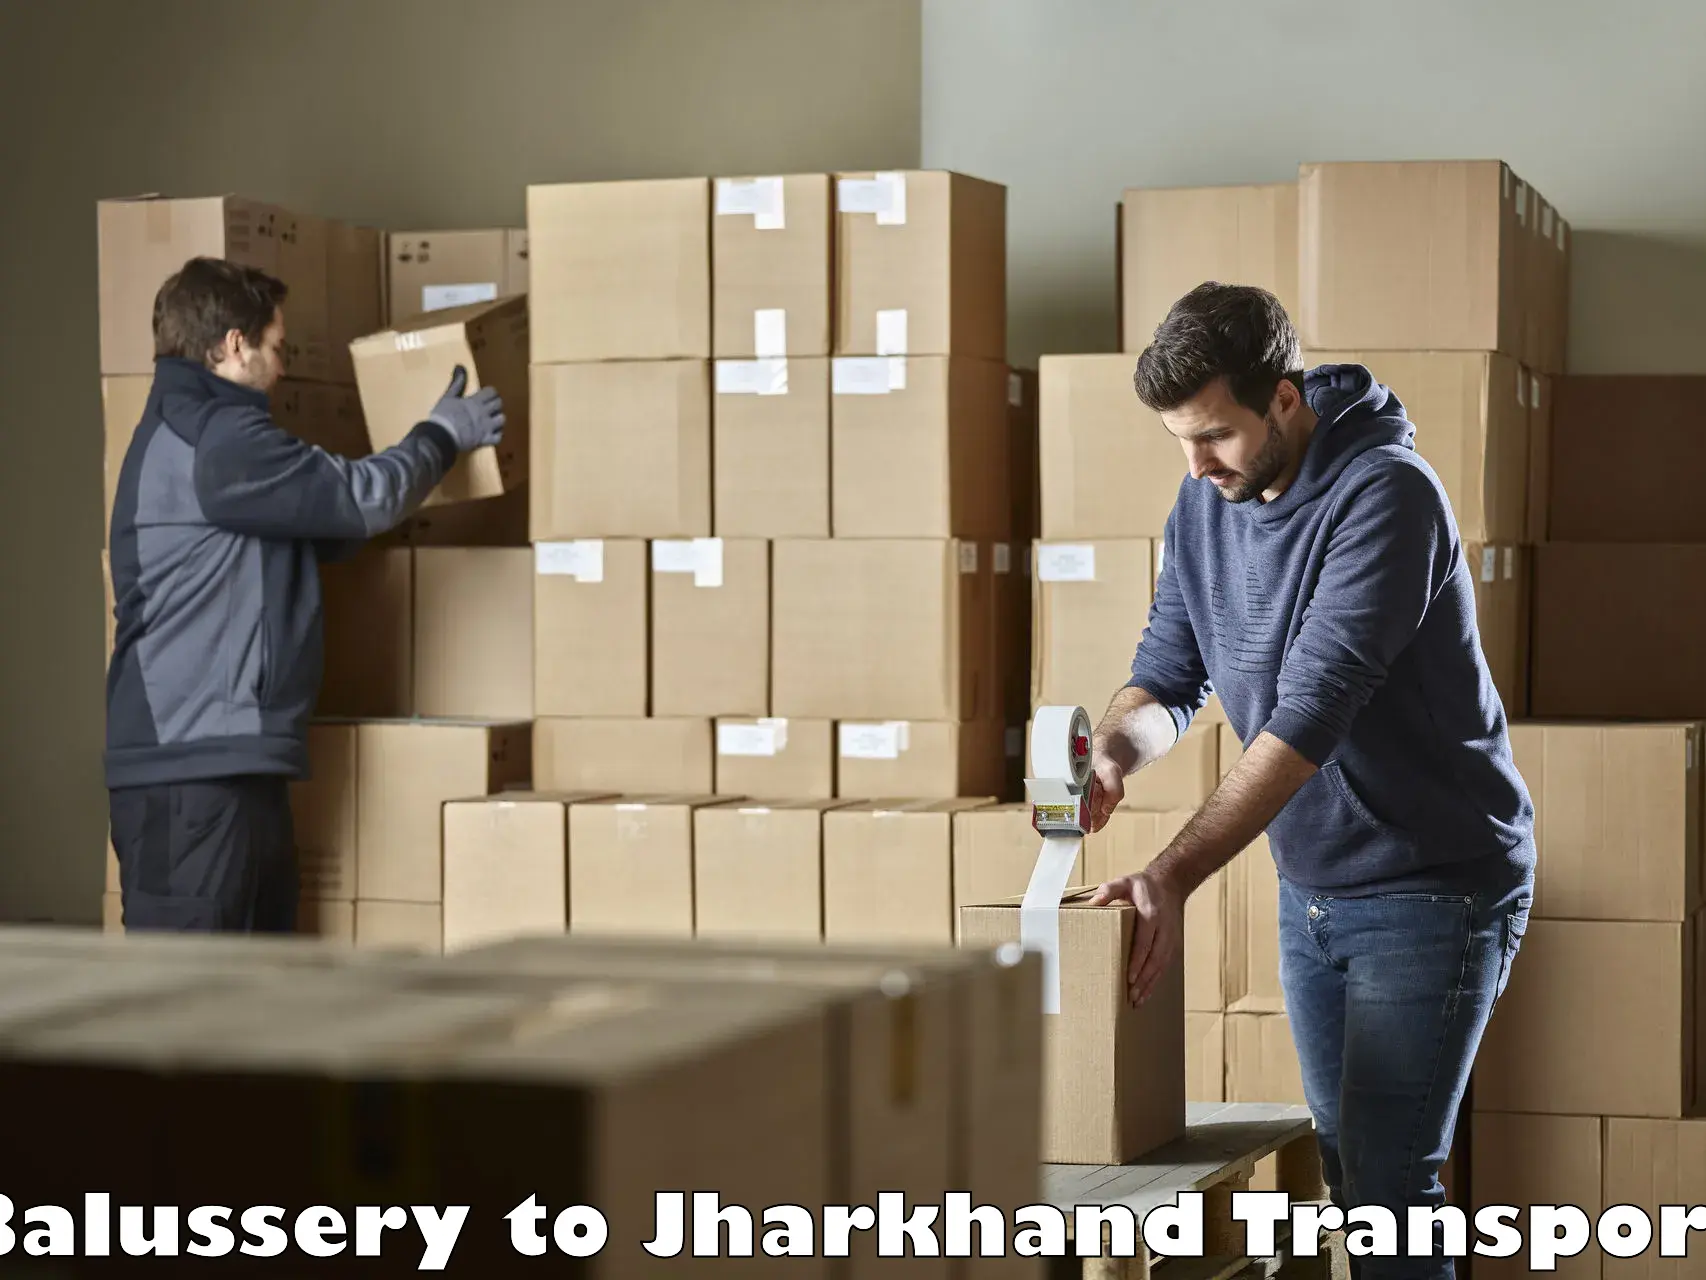 Part load transport service in India Balussery to Shikaripara